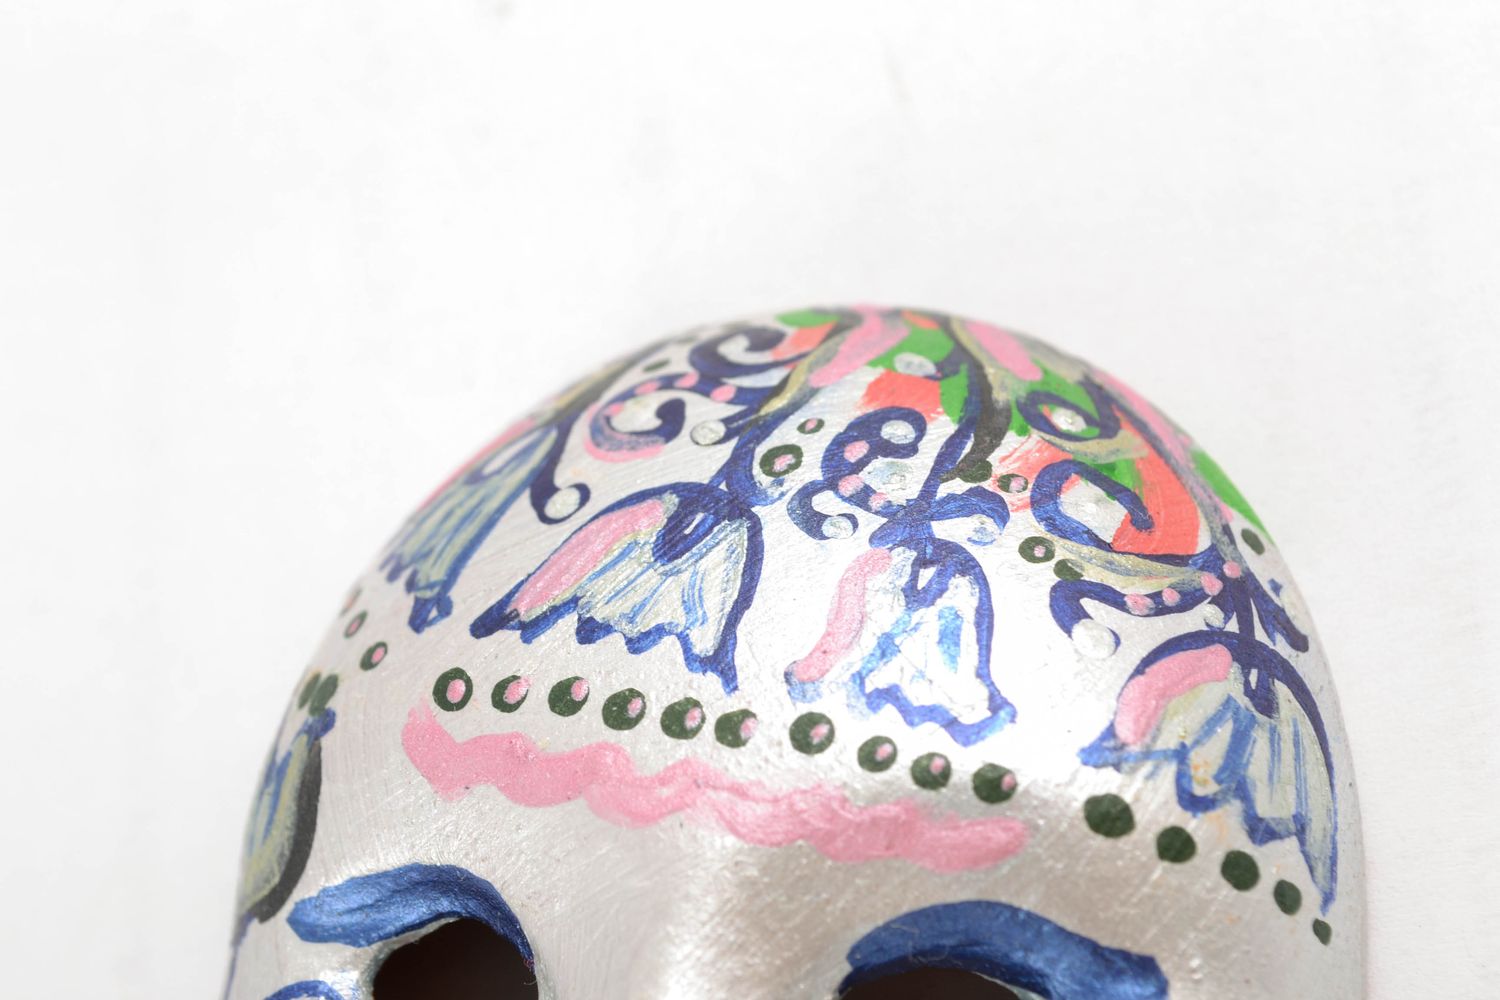 Clay souvenir mask with multi-colored patterns photo 4